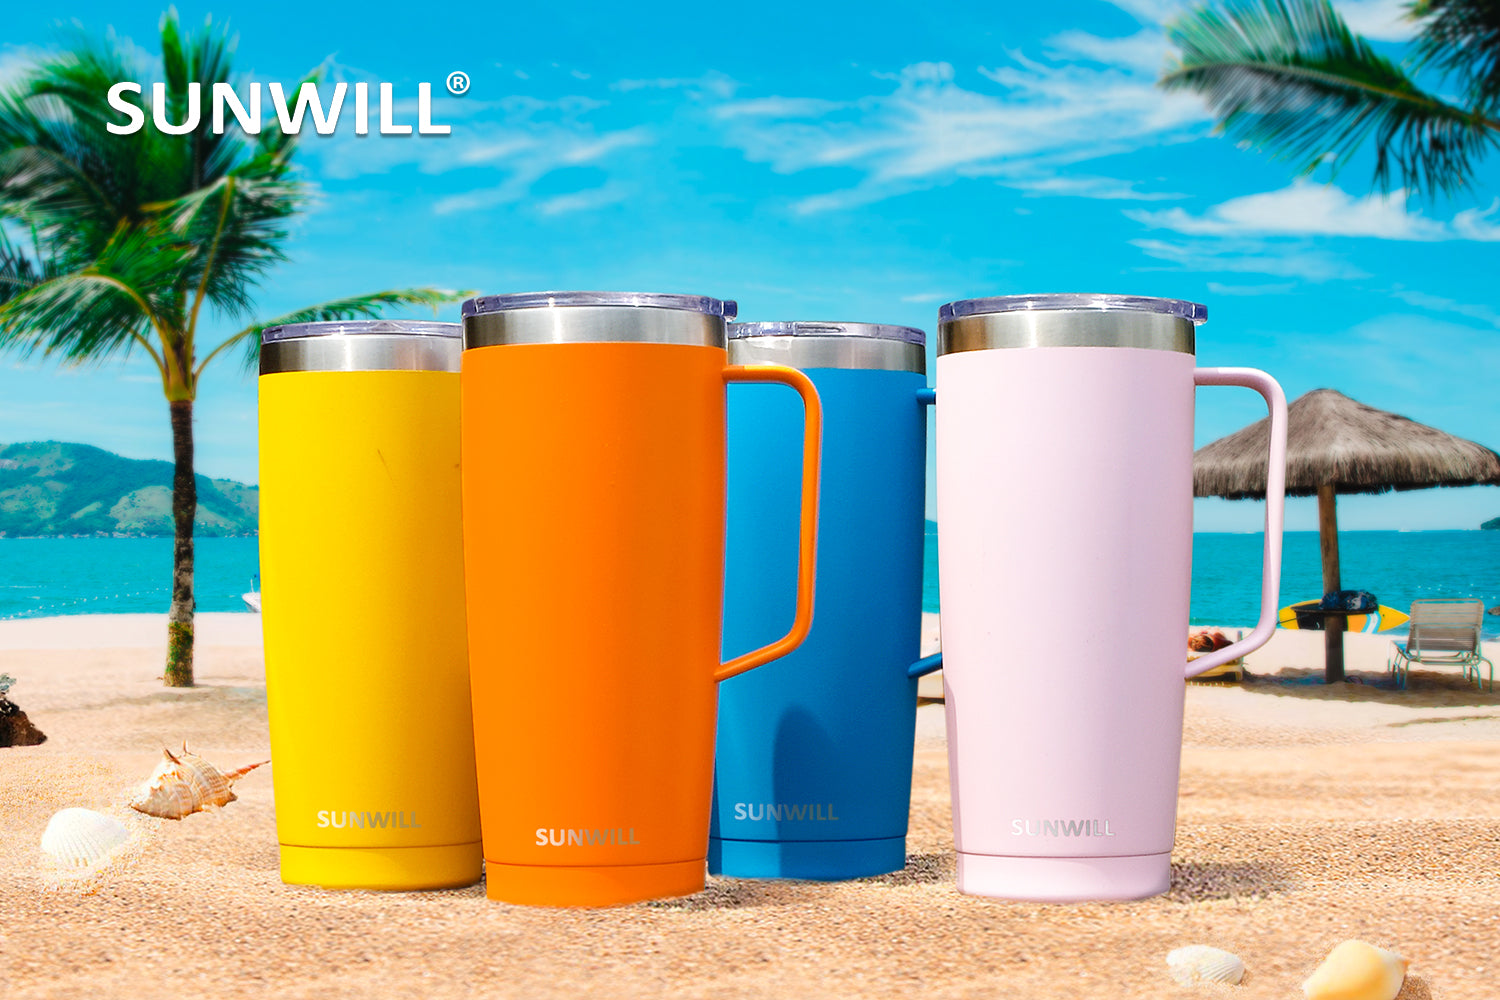 20 oz Stainless Steel Insulated Travel Tumbler with Handle - Powder Coated  (Case of 24)